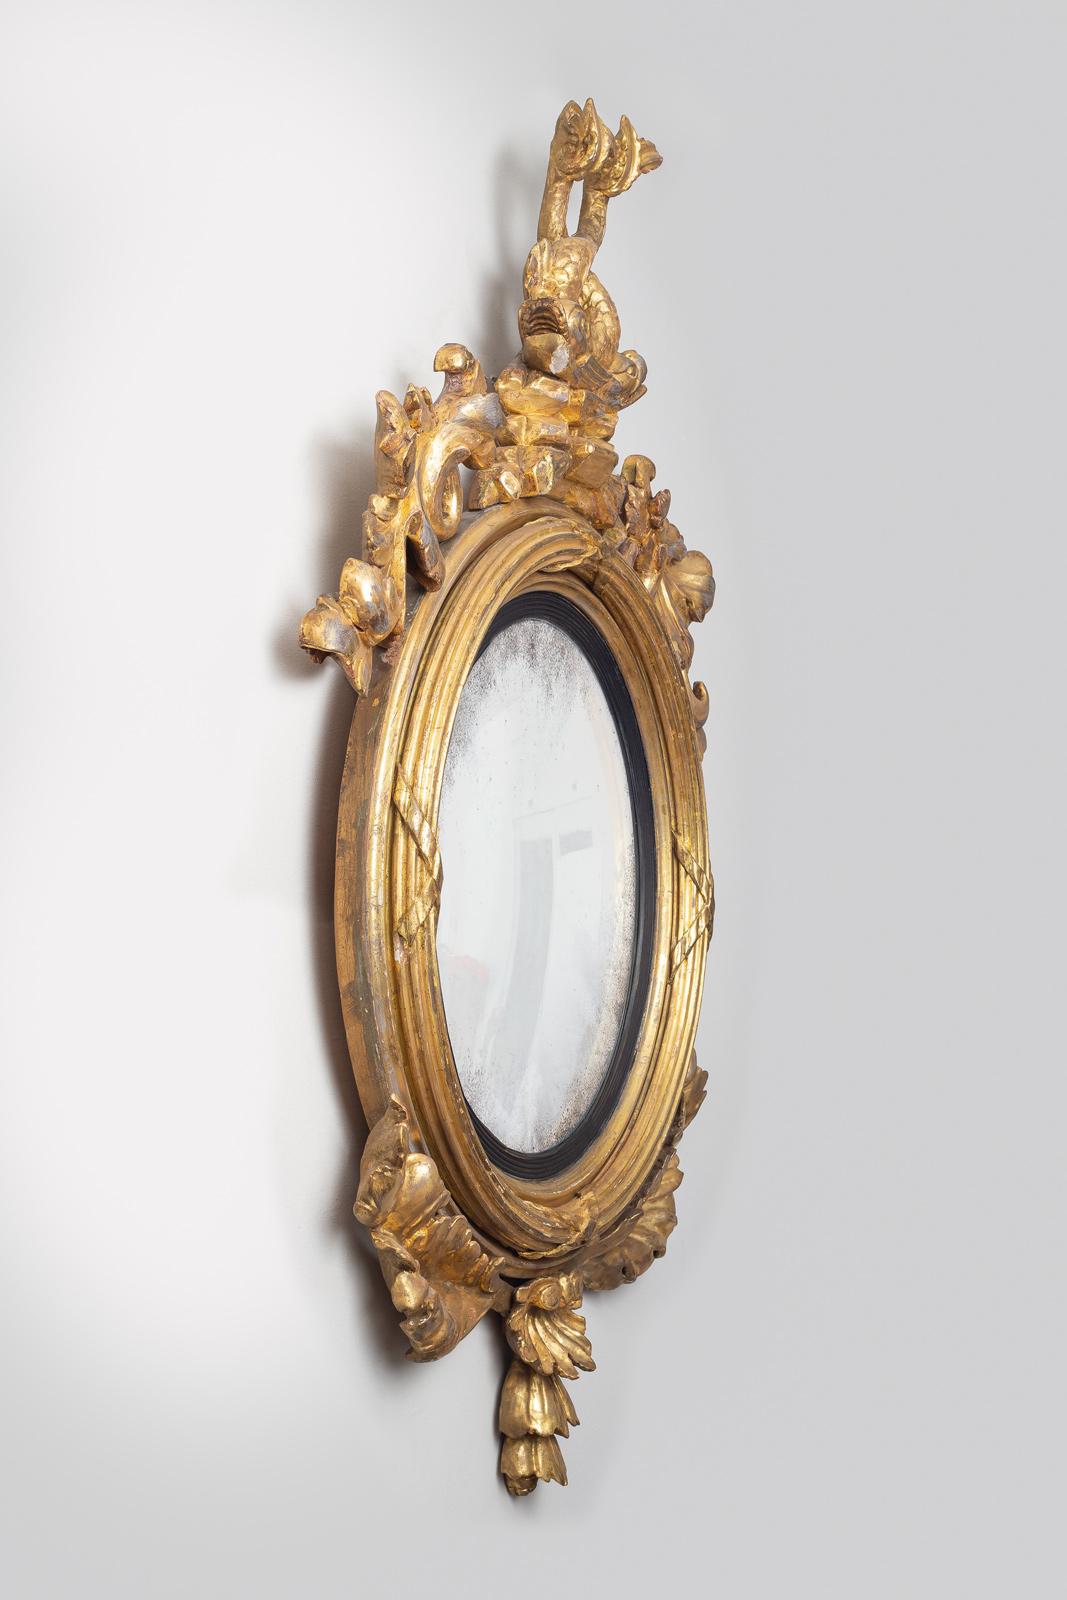 Period Regency giltwood convex mirror with crest of intertwined dolphins, sides decorated with carved acanthus leaves and carved shell undermount. Some wear to the gilding.